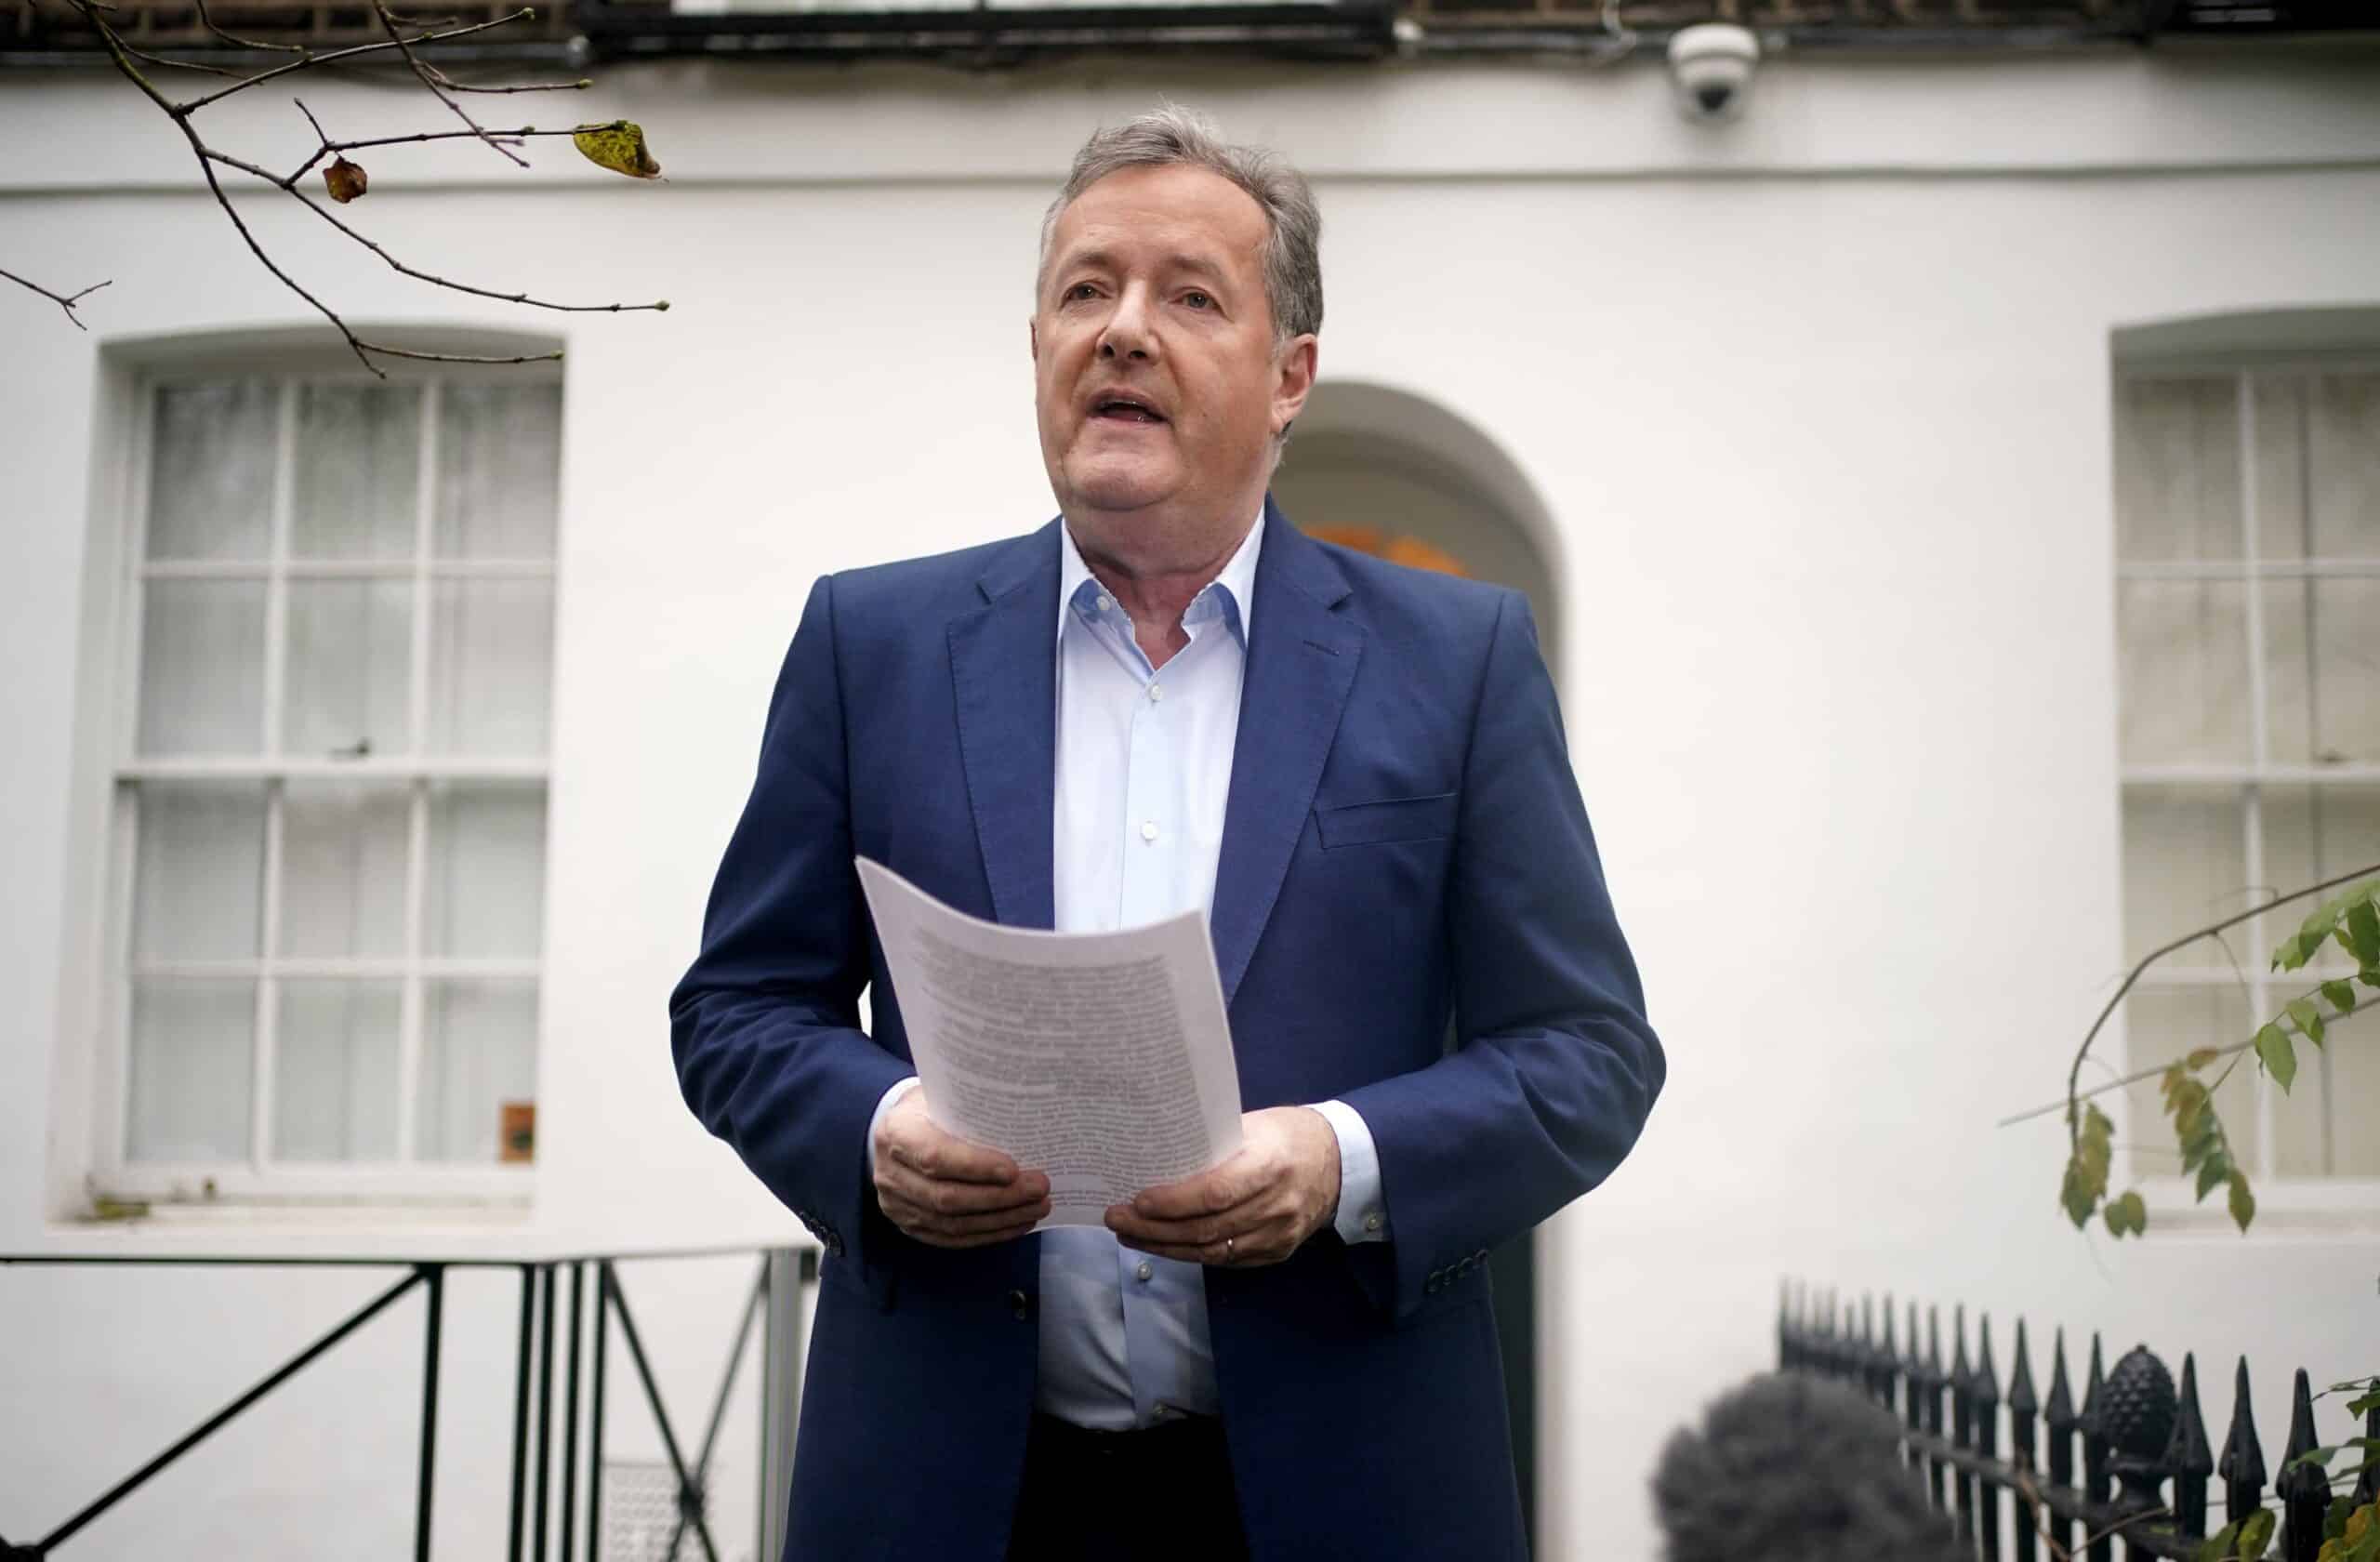 Piers Morgan releases stinging statement following High Court ruling